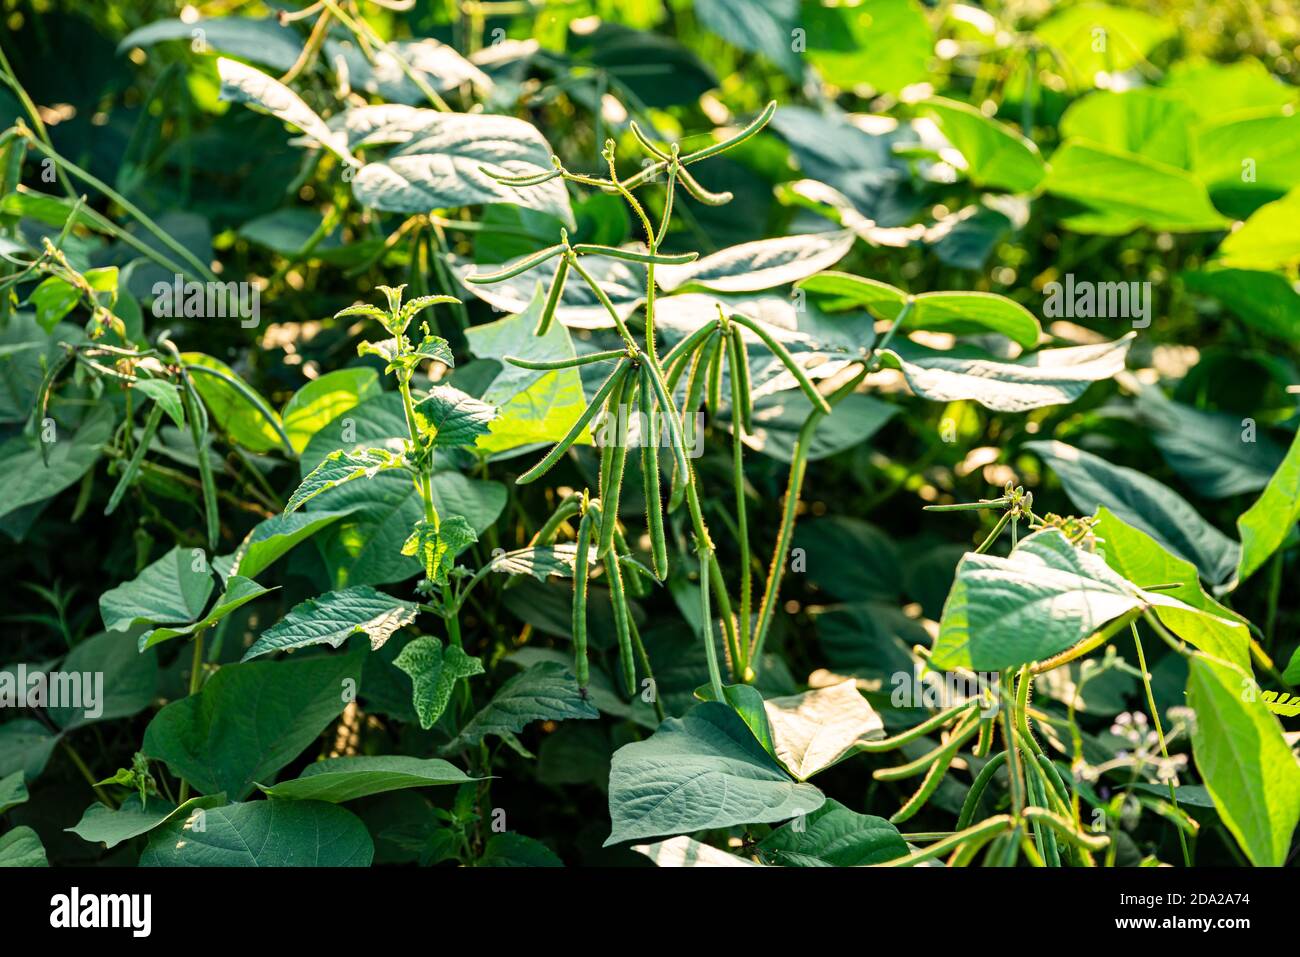 Green soybean field in sunny summer weather. Stock Photo